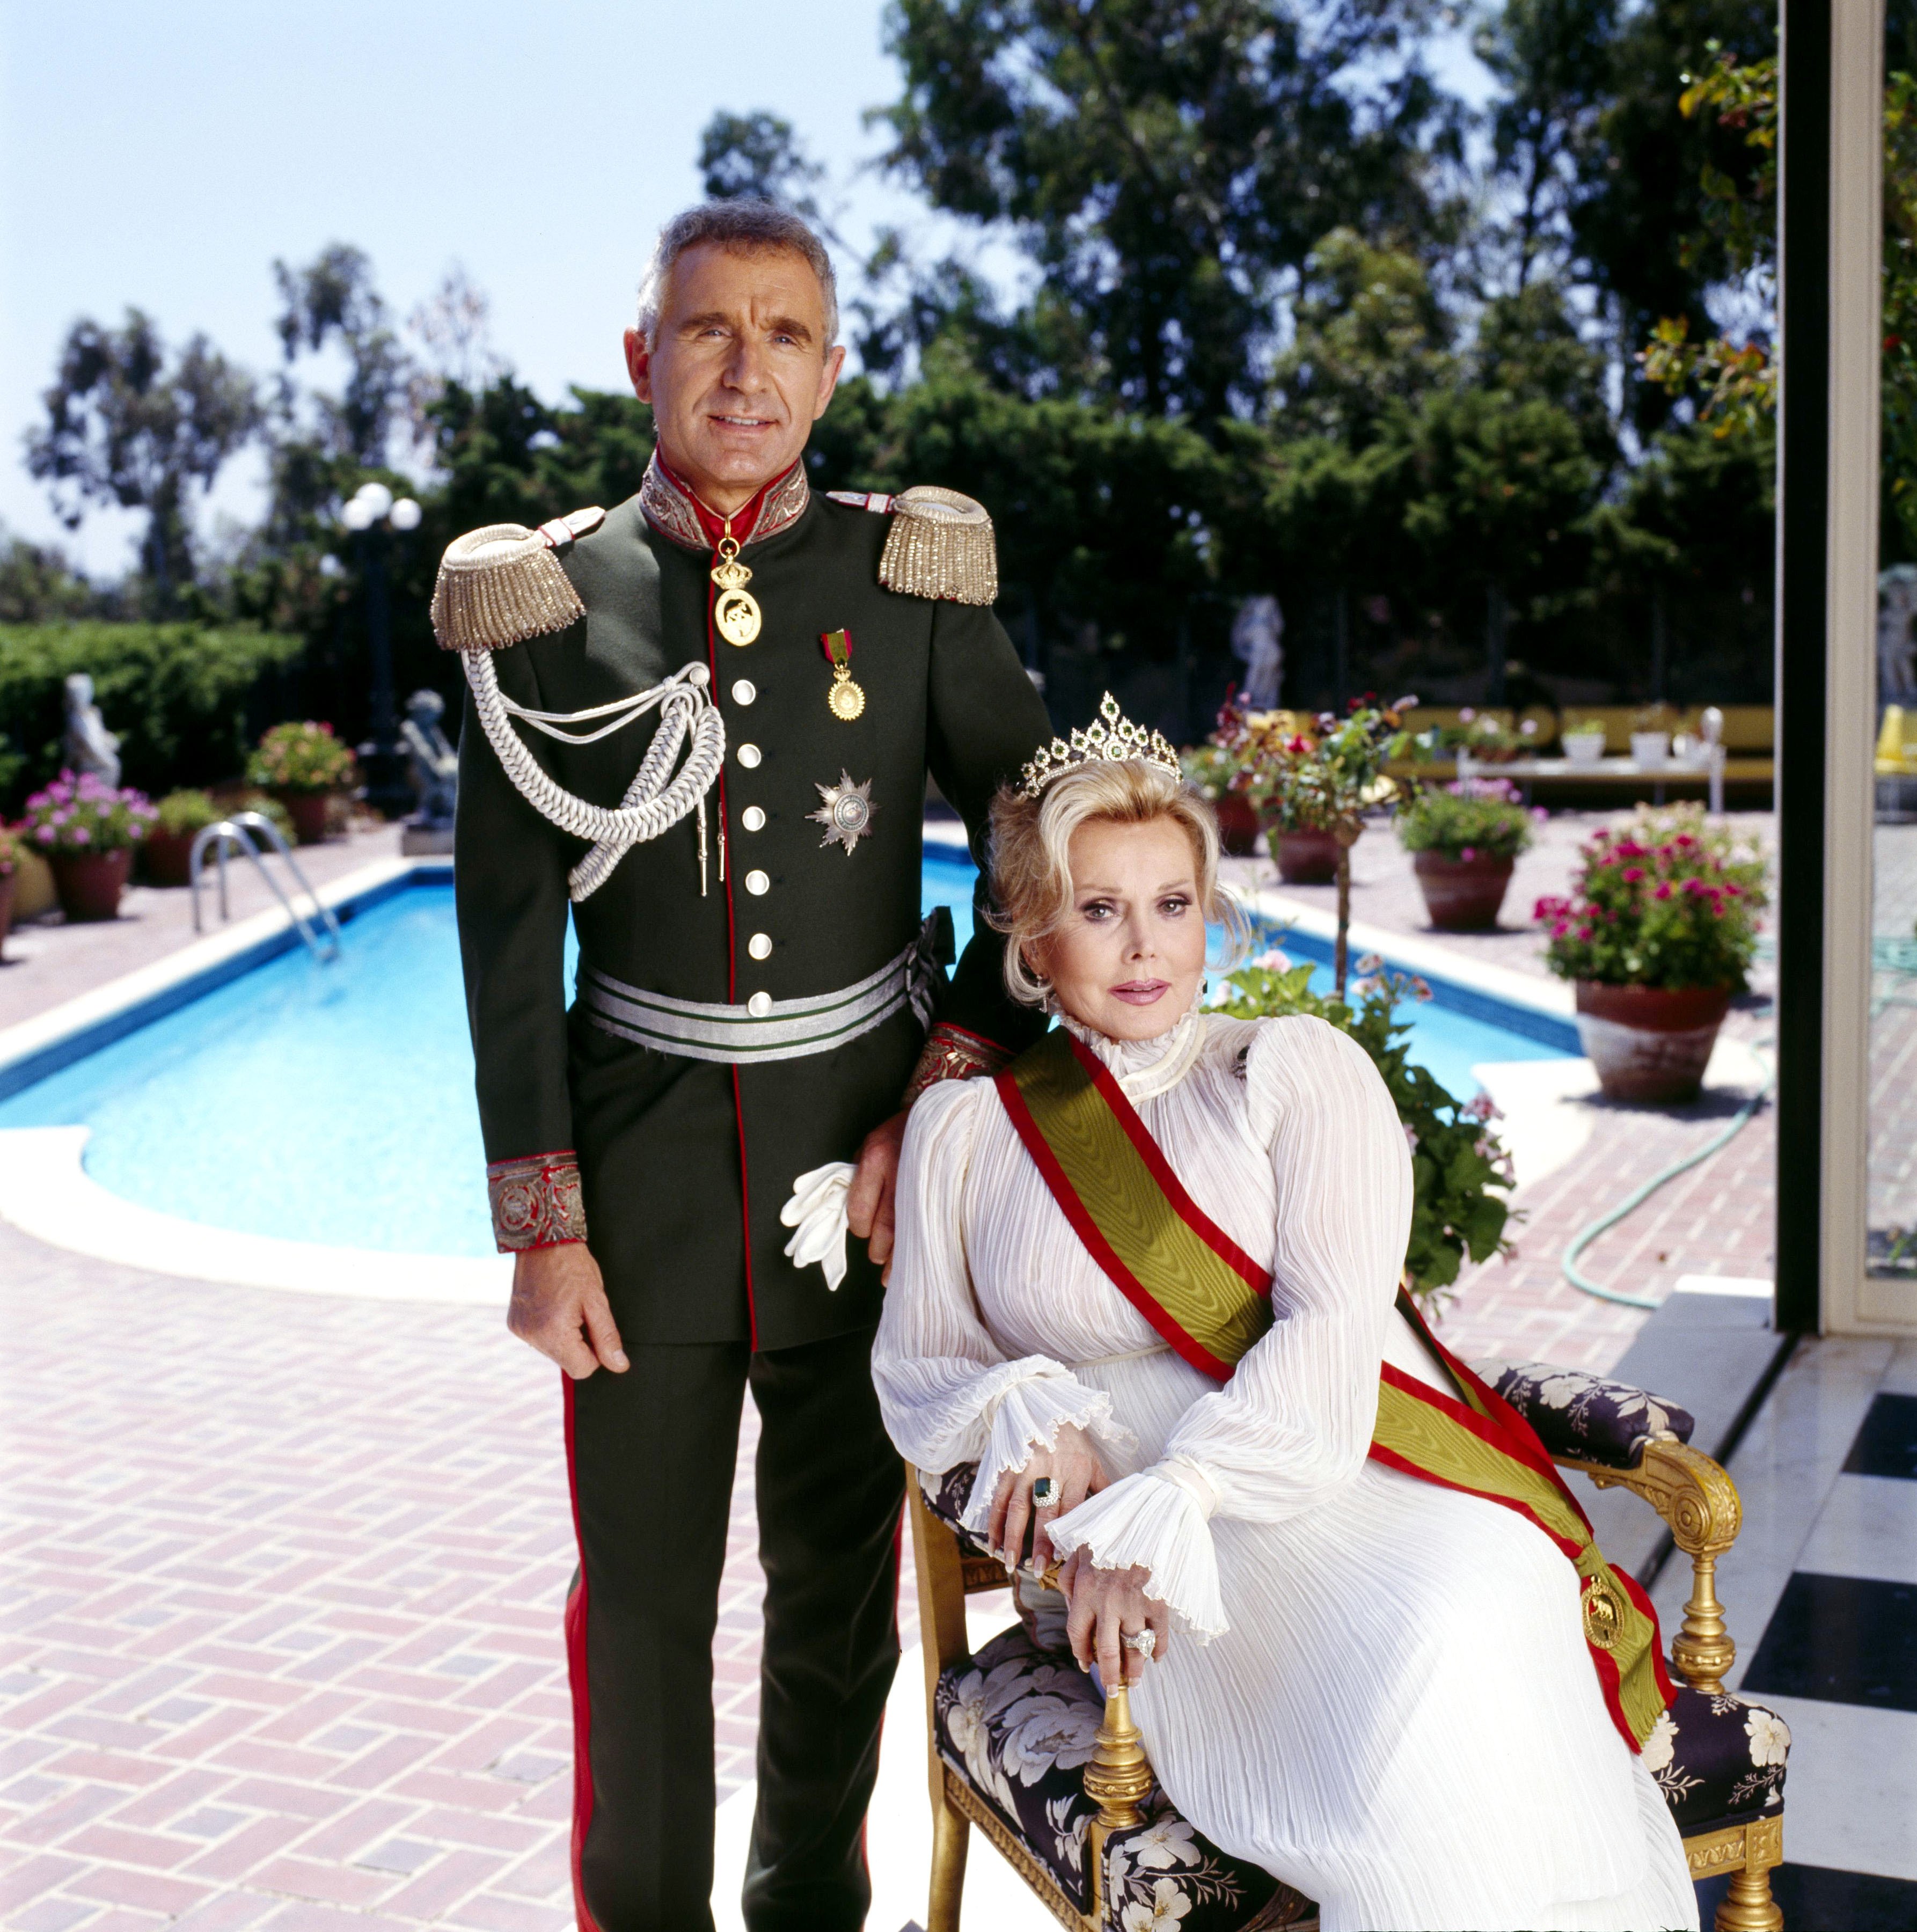 Zsa Zsa Gabor with her ninth husband Frederic Prinz von Anhalt photographed at home on June 6, 1990 in Bel Air, California | Source: Getty Images